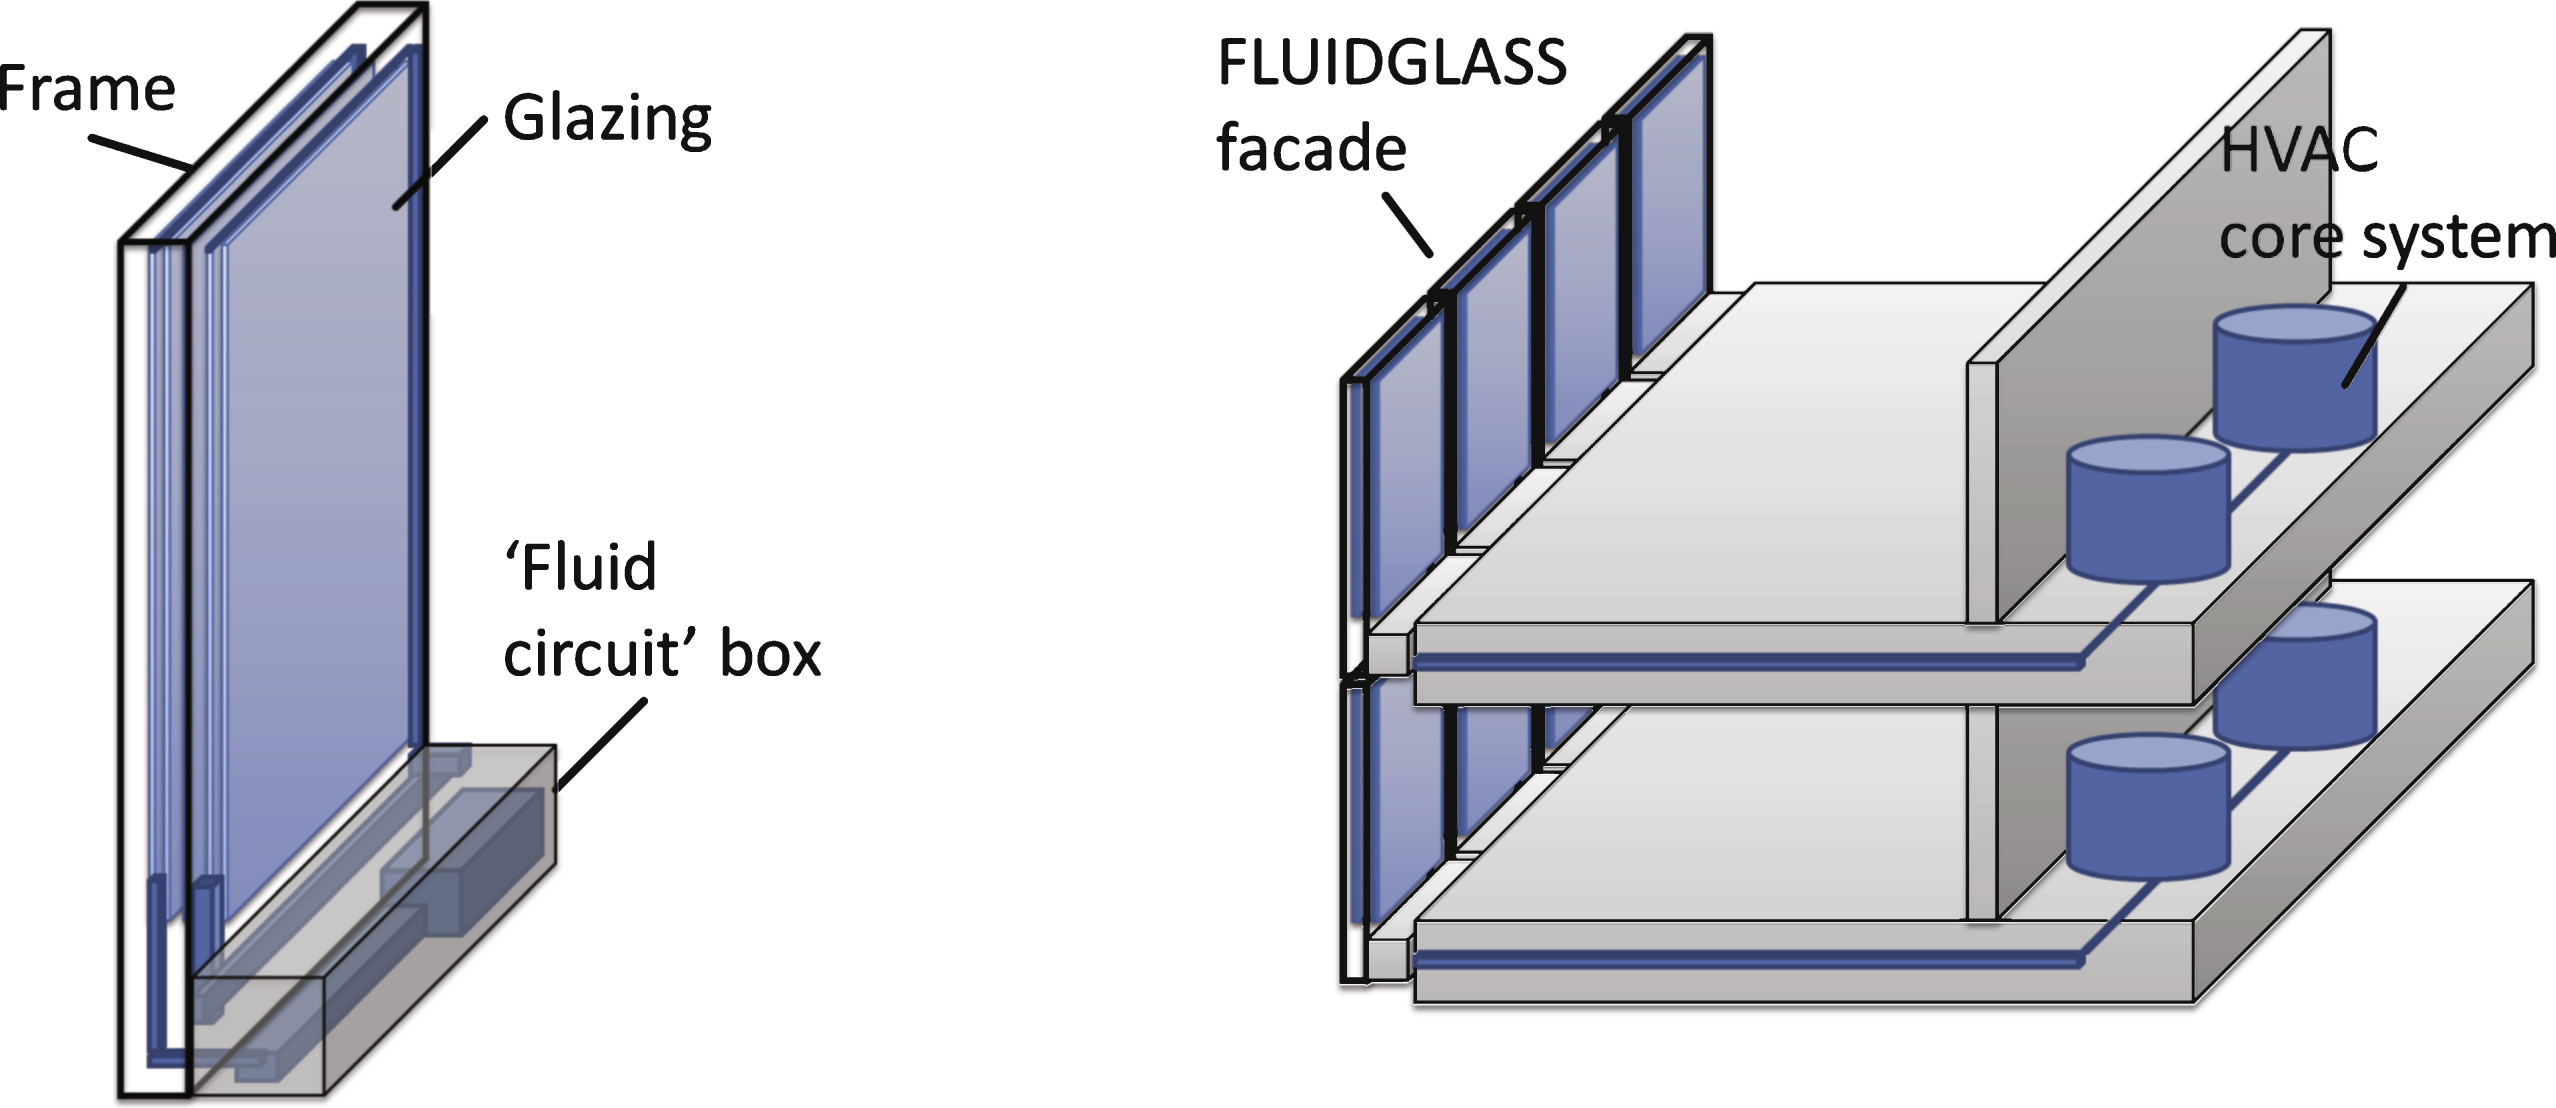 Diagram of the Fluidgass facade element, showing the glazing and the fluid circuit box (illustration on the left) and the Fluidglass facade connected to the building HVAC core system on the right.